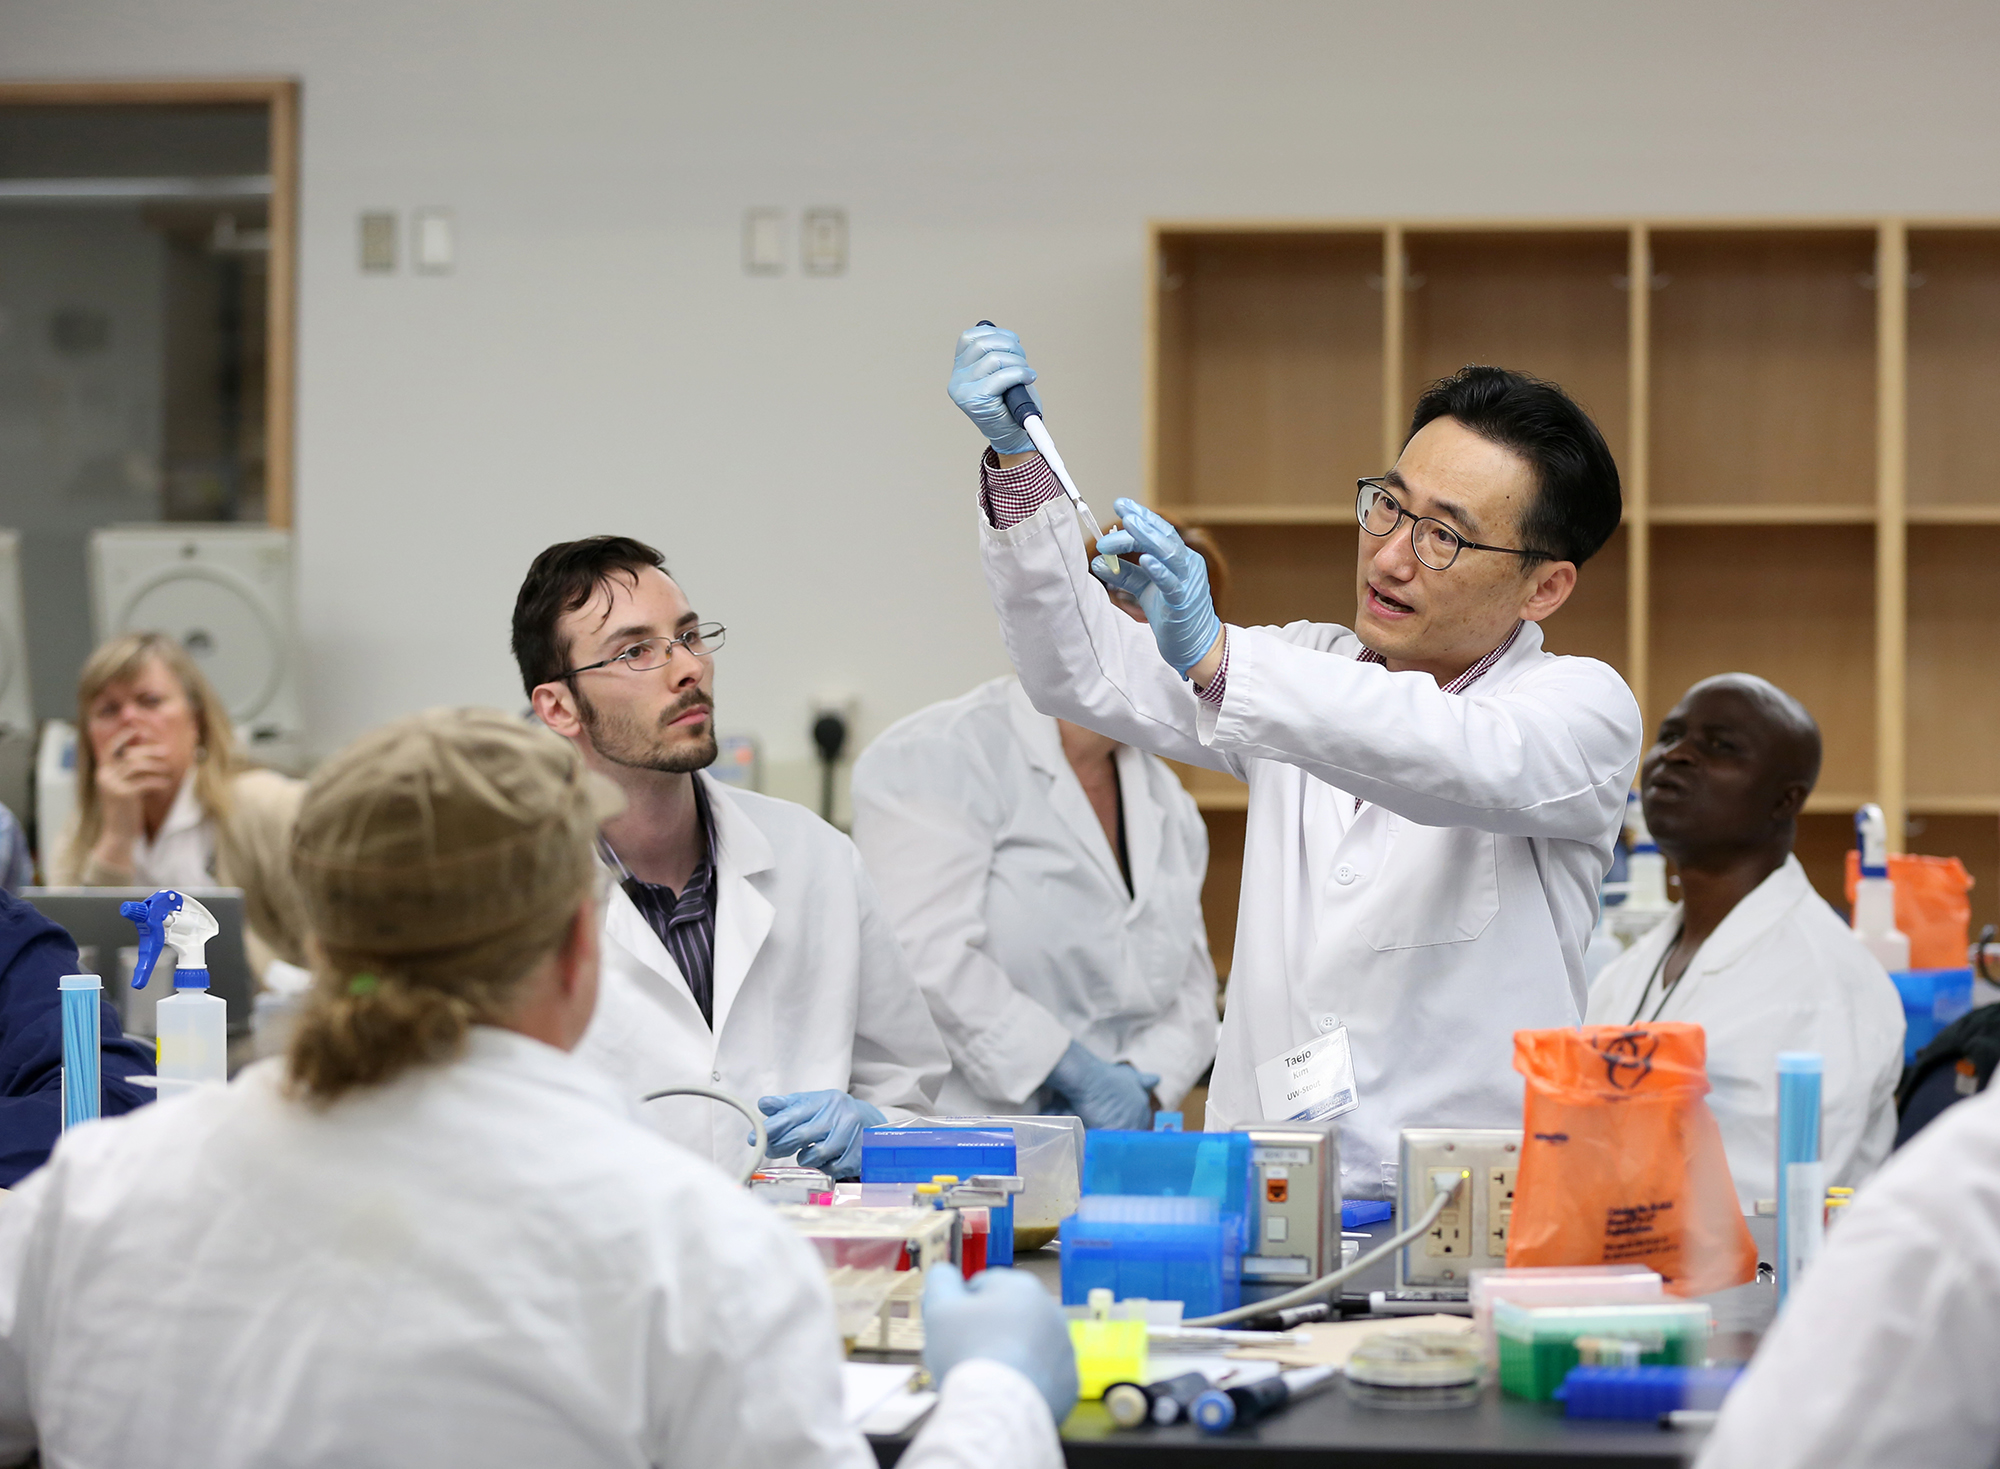 Taejo Kim, University of Wisconsin-Stout assistant professor in the department of food and nutrition, describes food safety and testing for foodborne pathogens at a UW-Stout Furthering Food Safety Workshop. /UW-Stout photos by Brett T. Roseman.